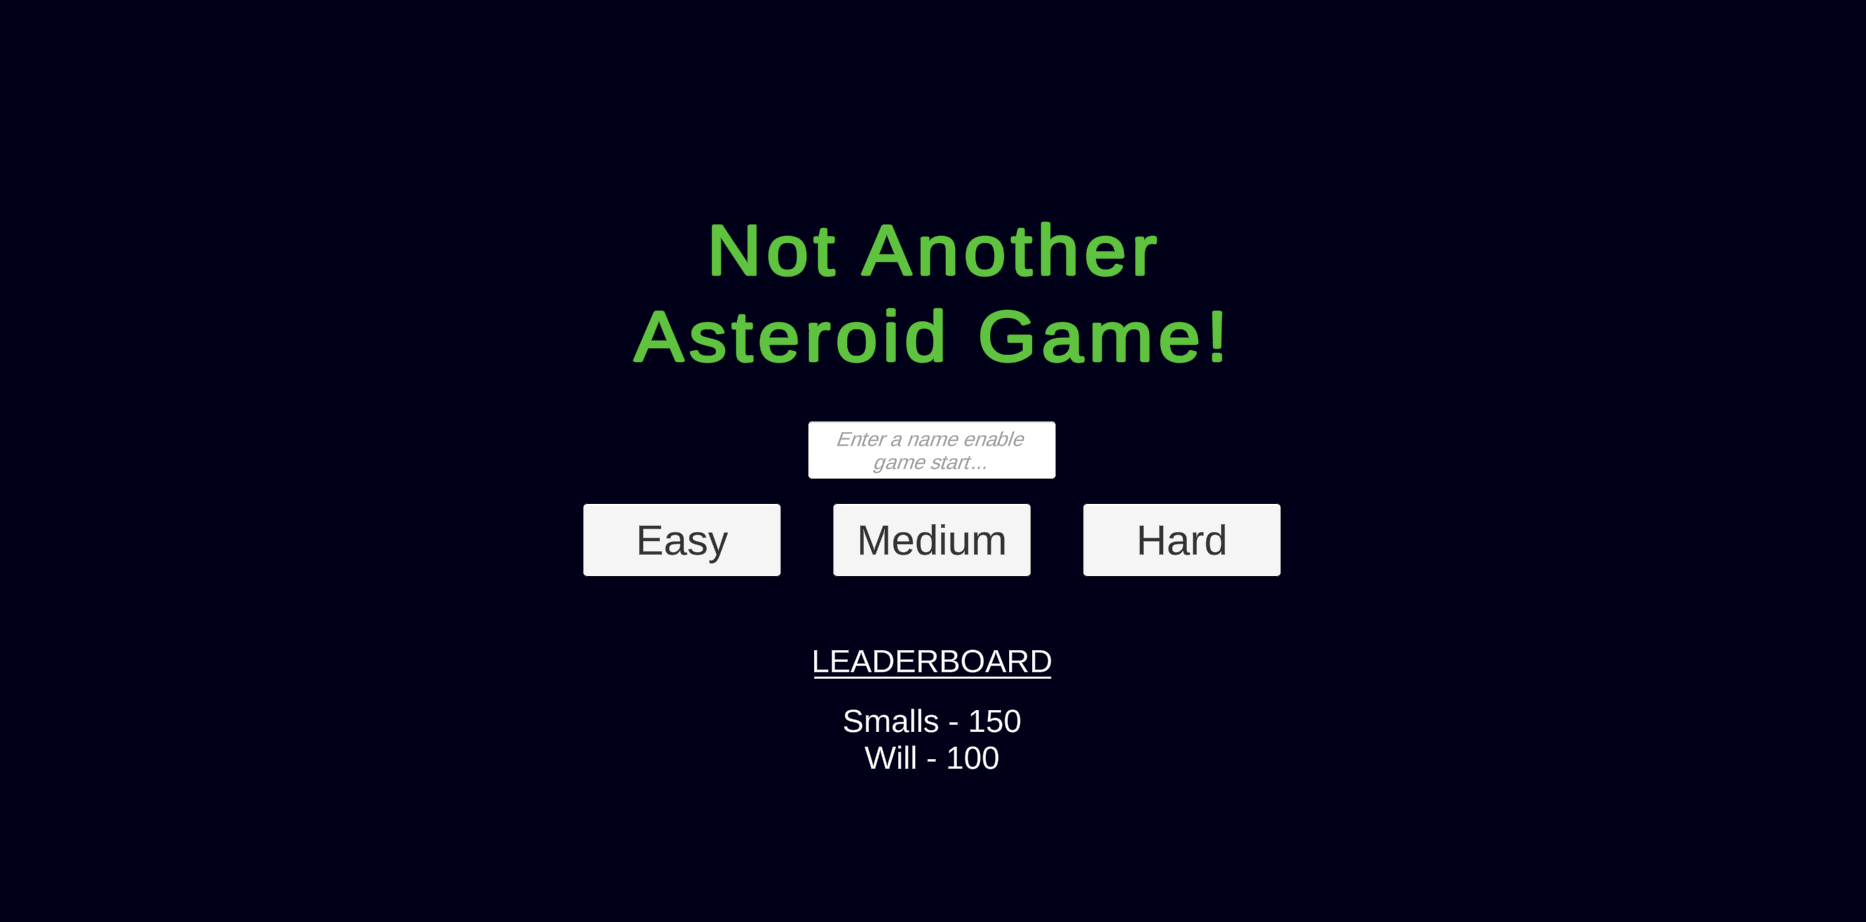 Not Another Asteroid Game!